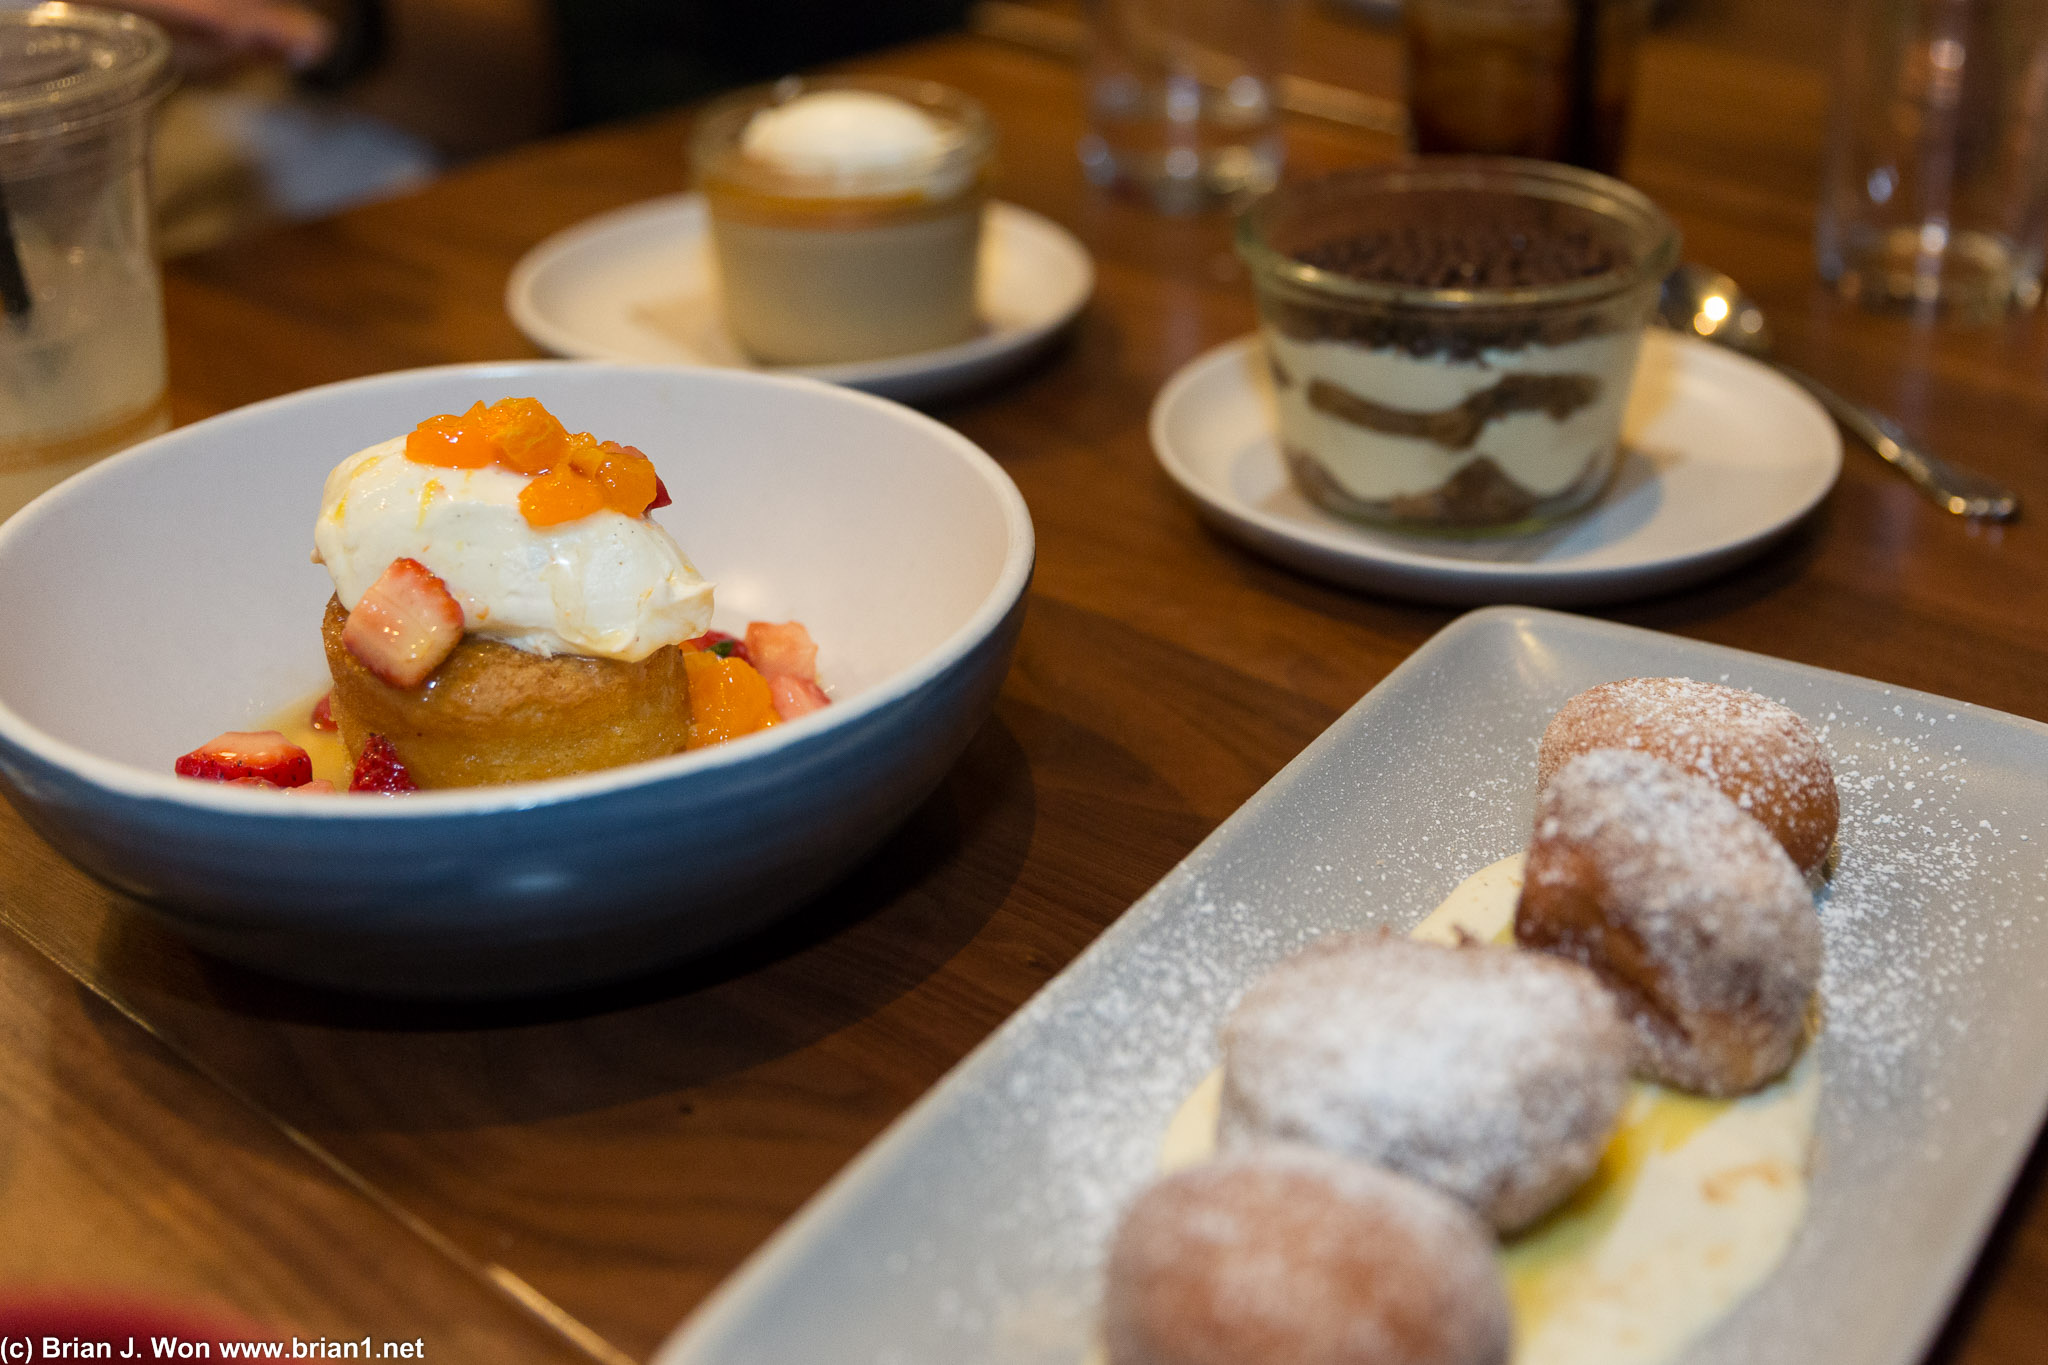 Olive oil cake and beignets in the foreground. Nom, especially the beignets!